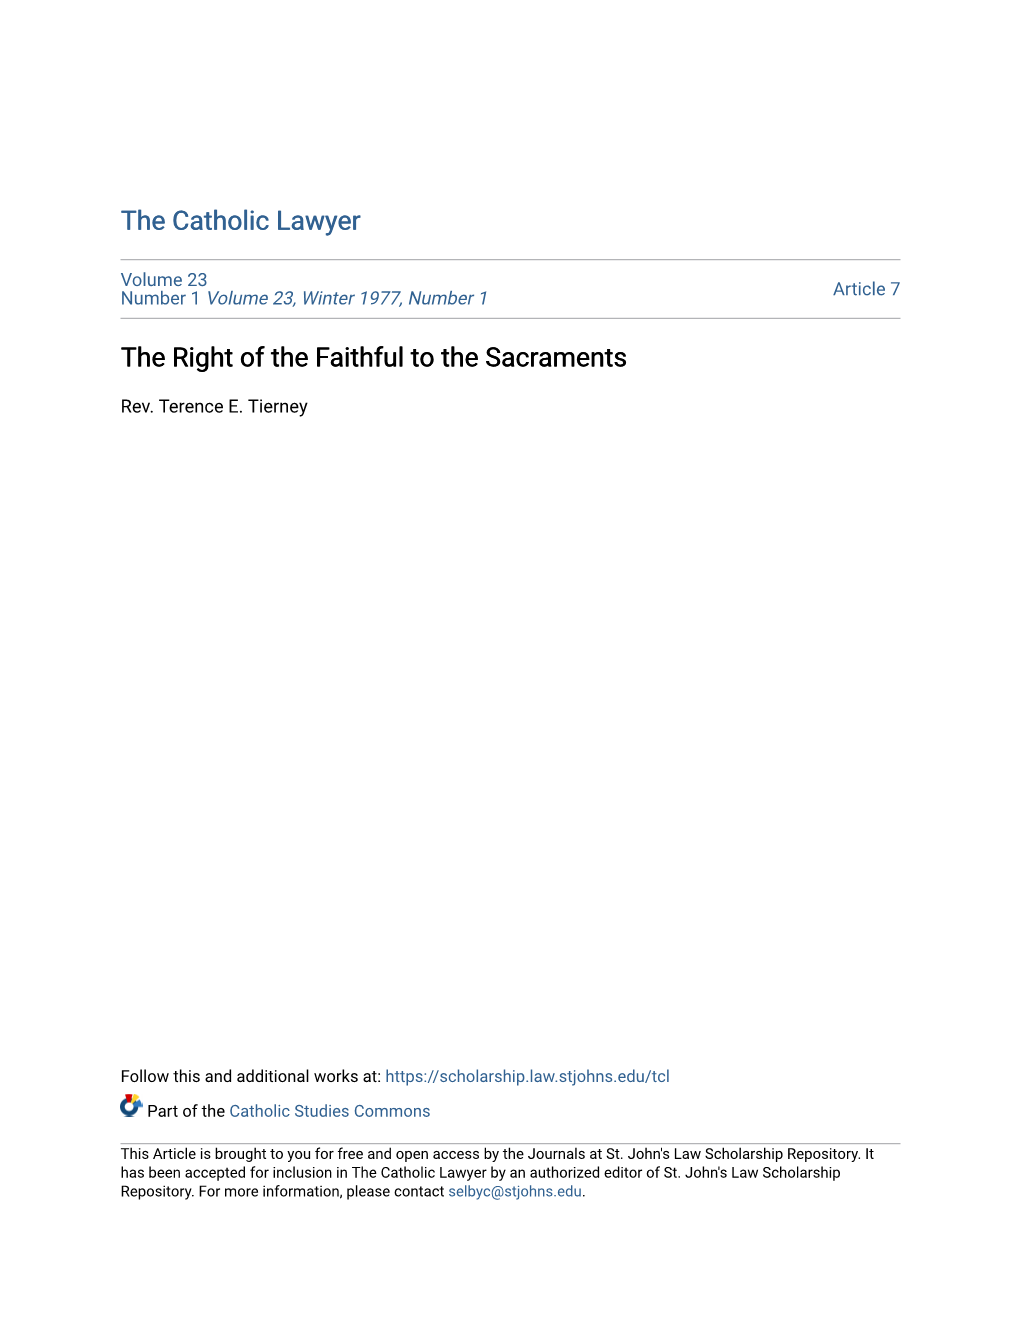 The Right of the Faithful to the Sacraments